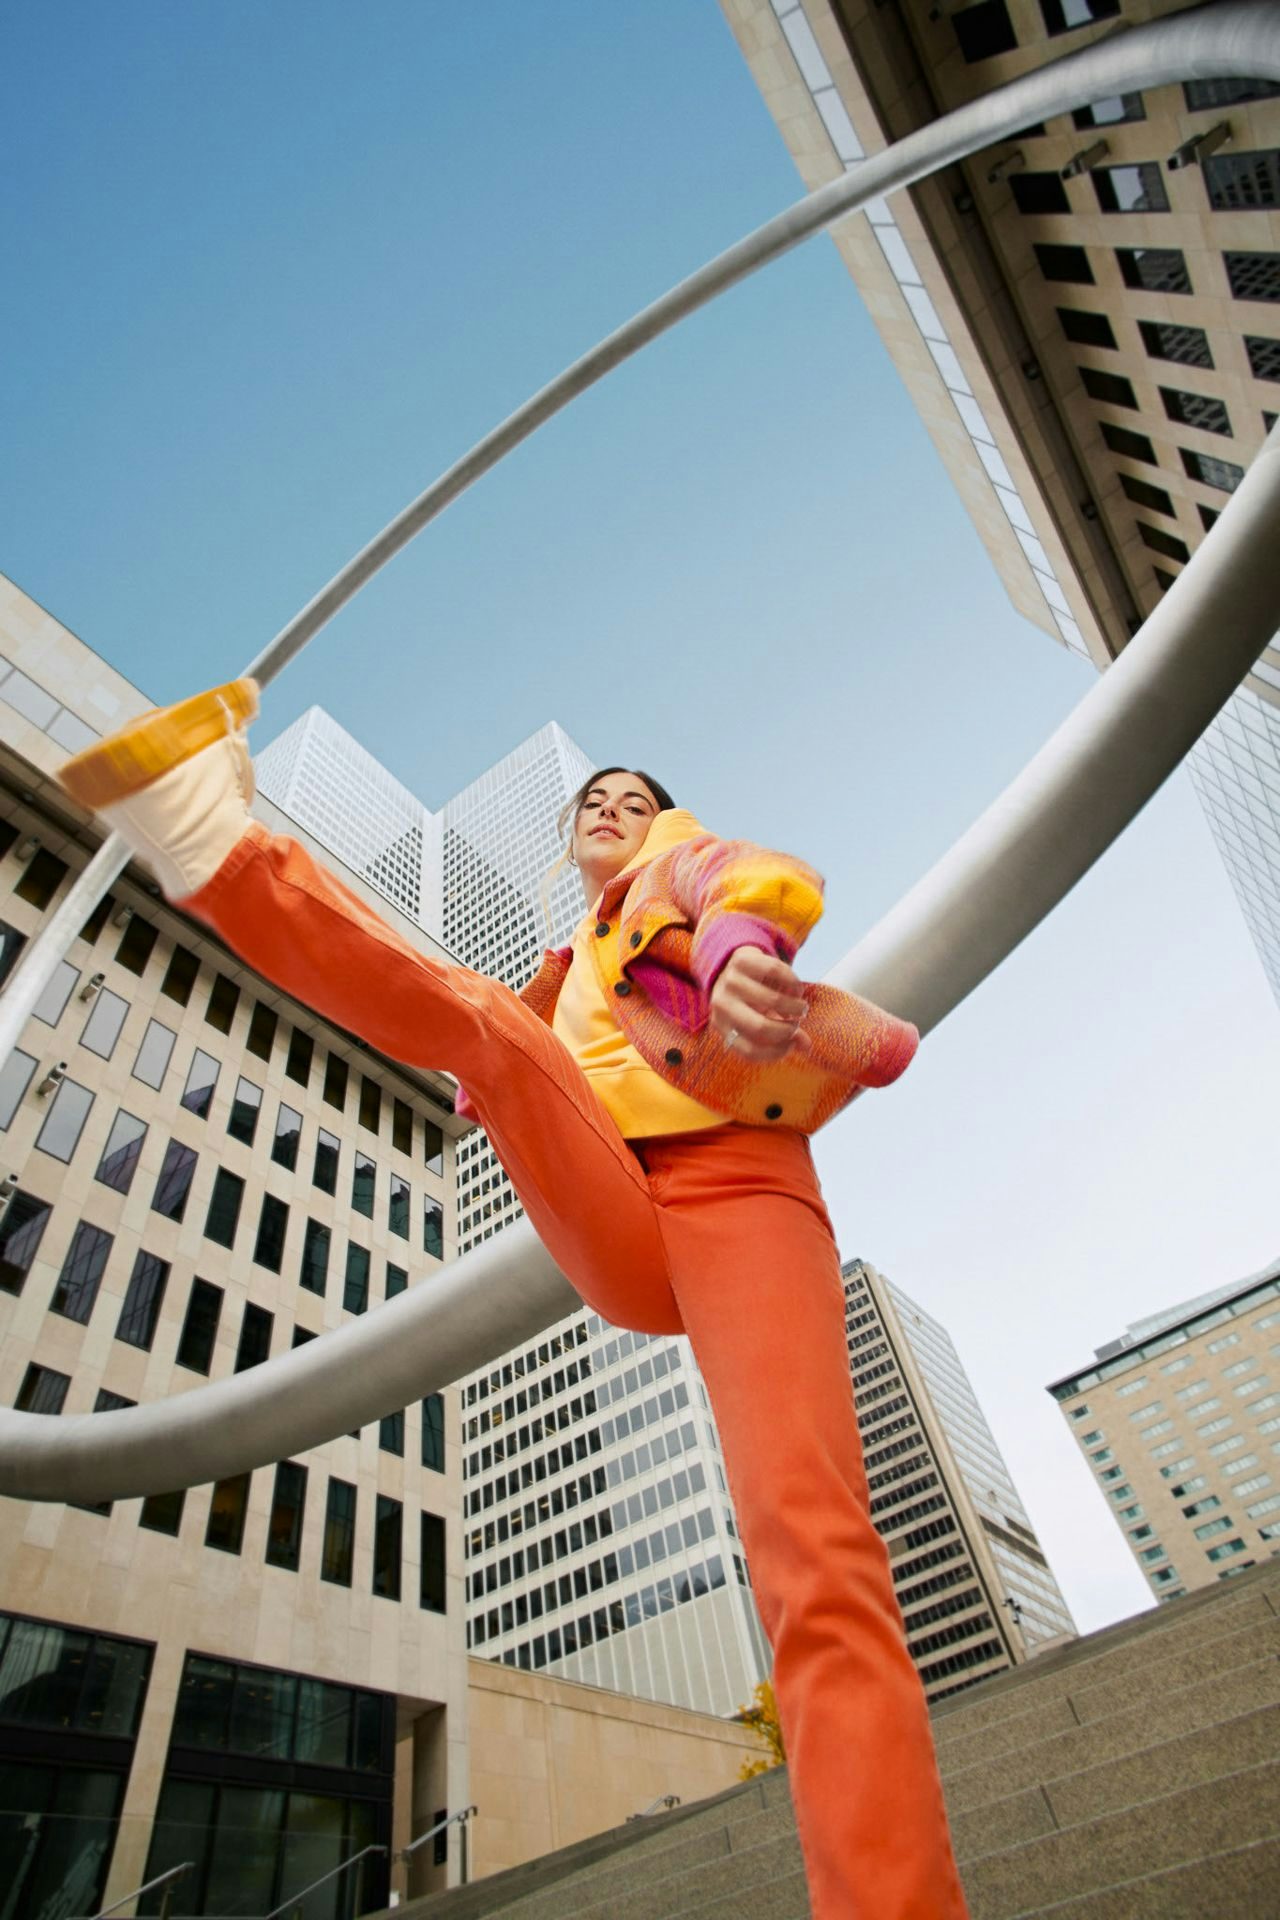  A dynamic upward angle of a person in vibrant orange pants and a colorful jacket posed against the backdrop of L'Anneau in downtown Montreal.